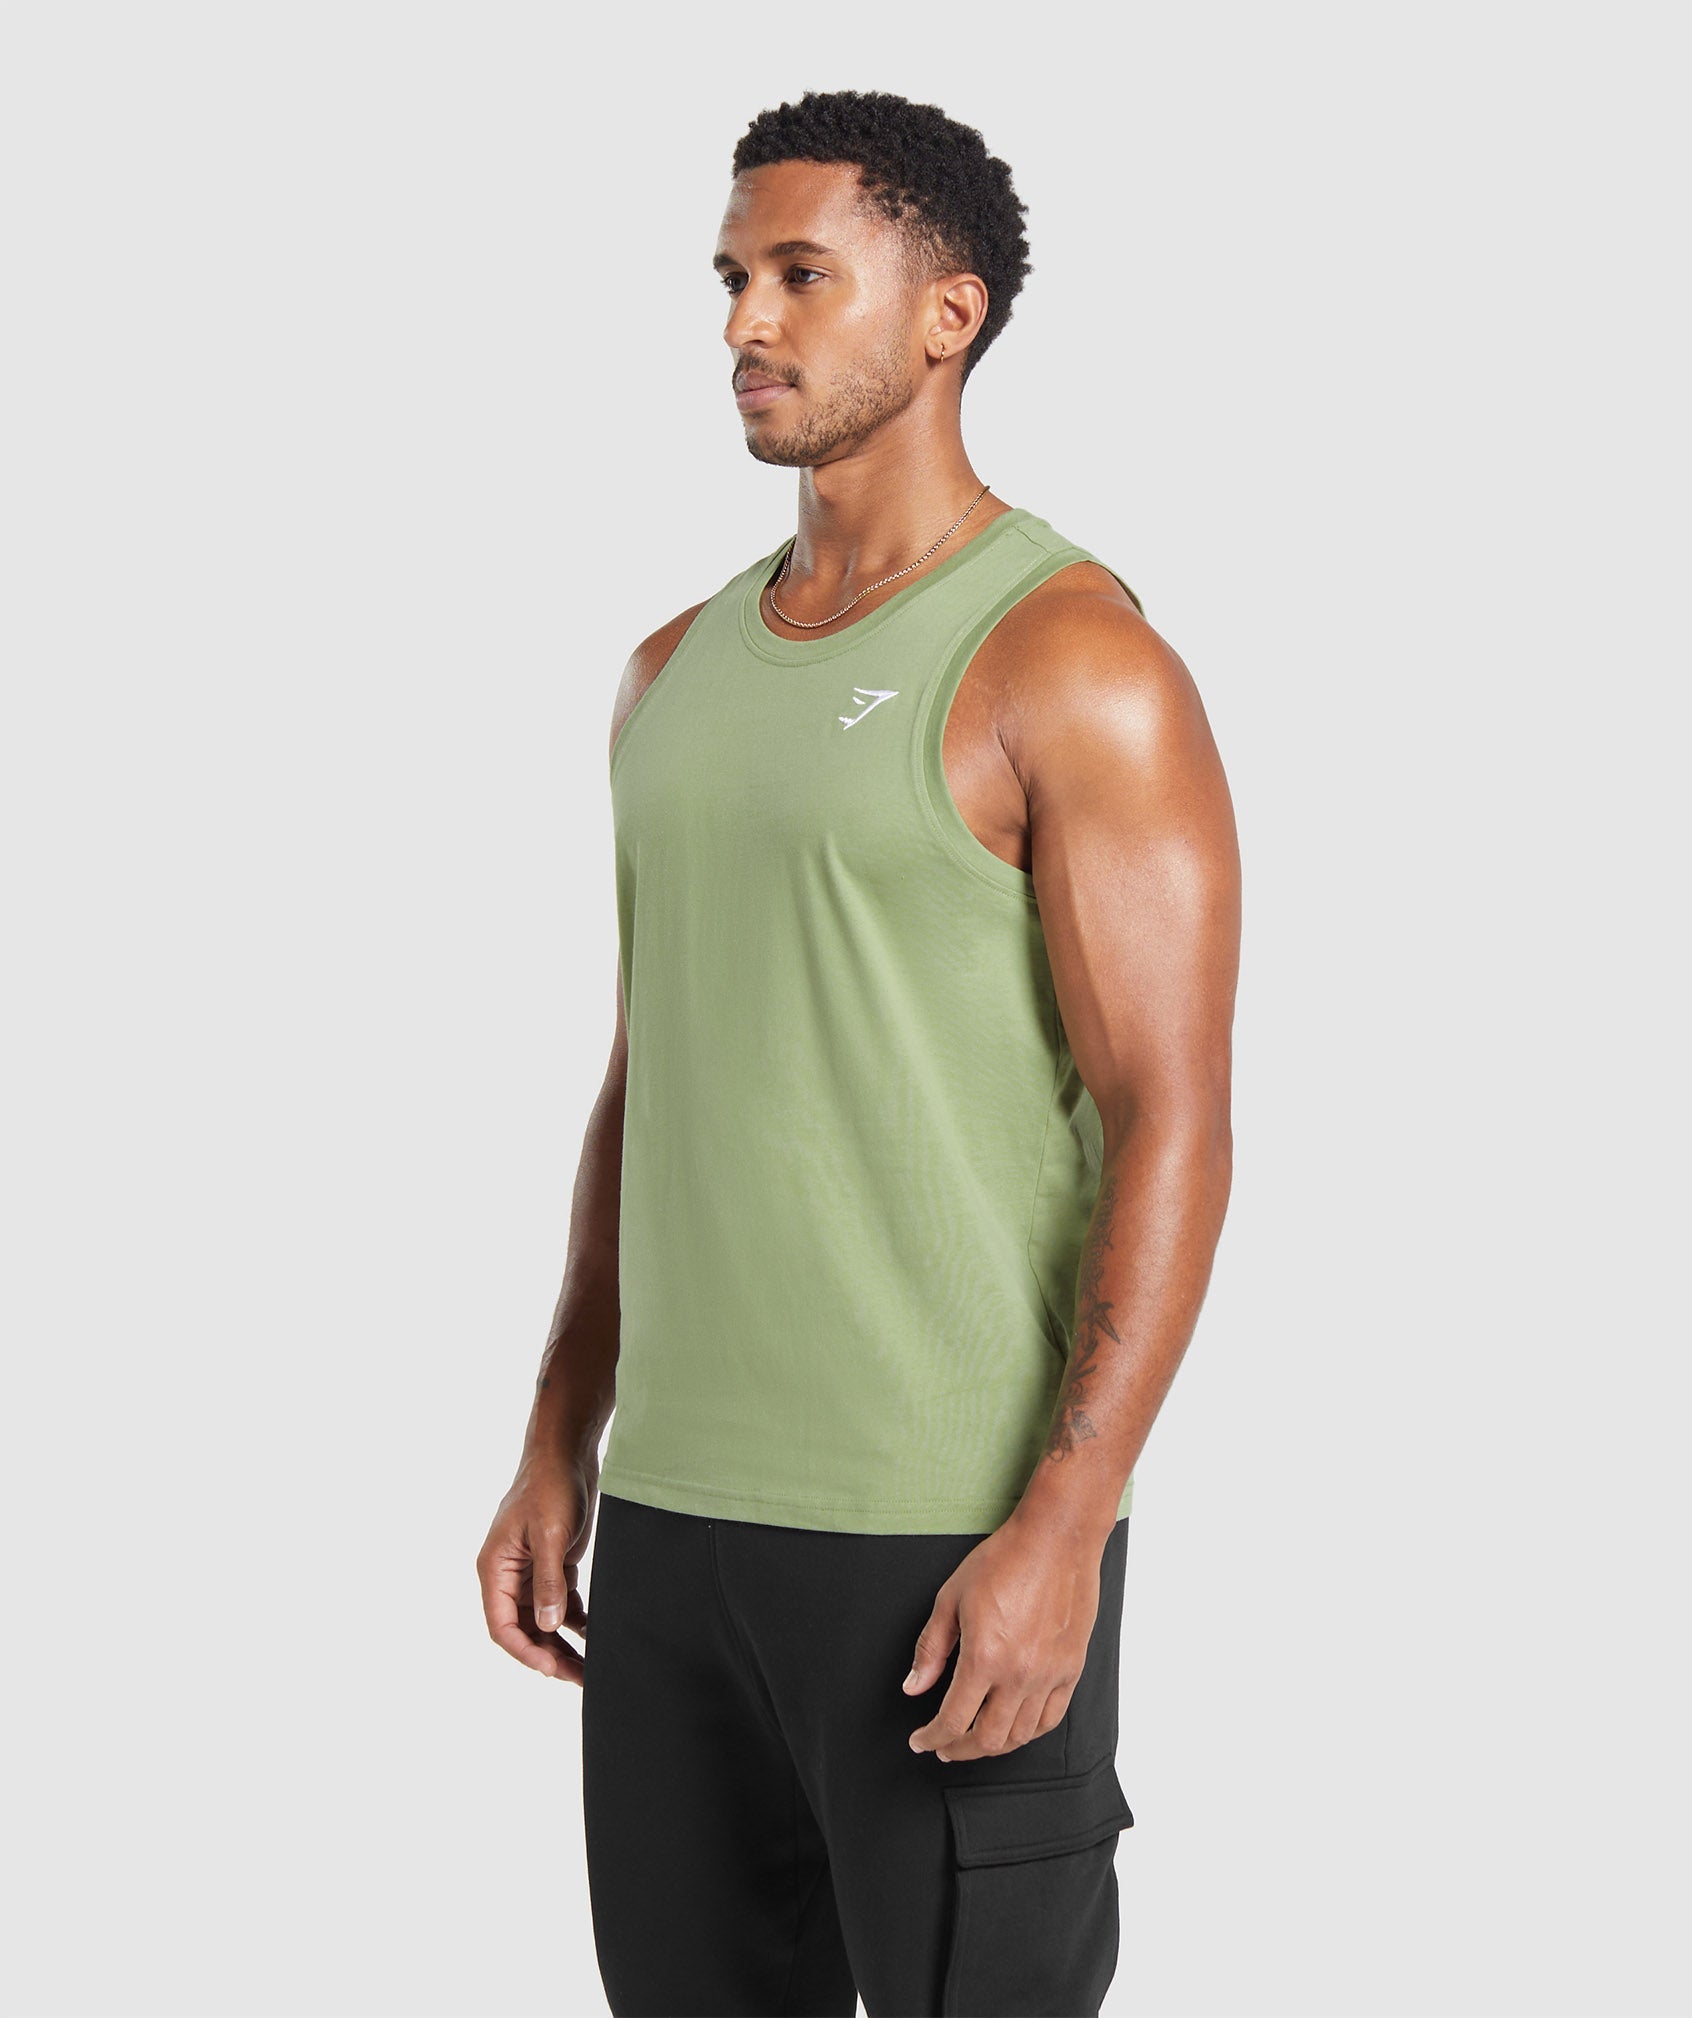 Crest Tank in Natural Sage Green - view 3